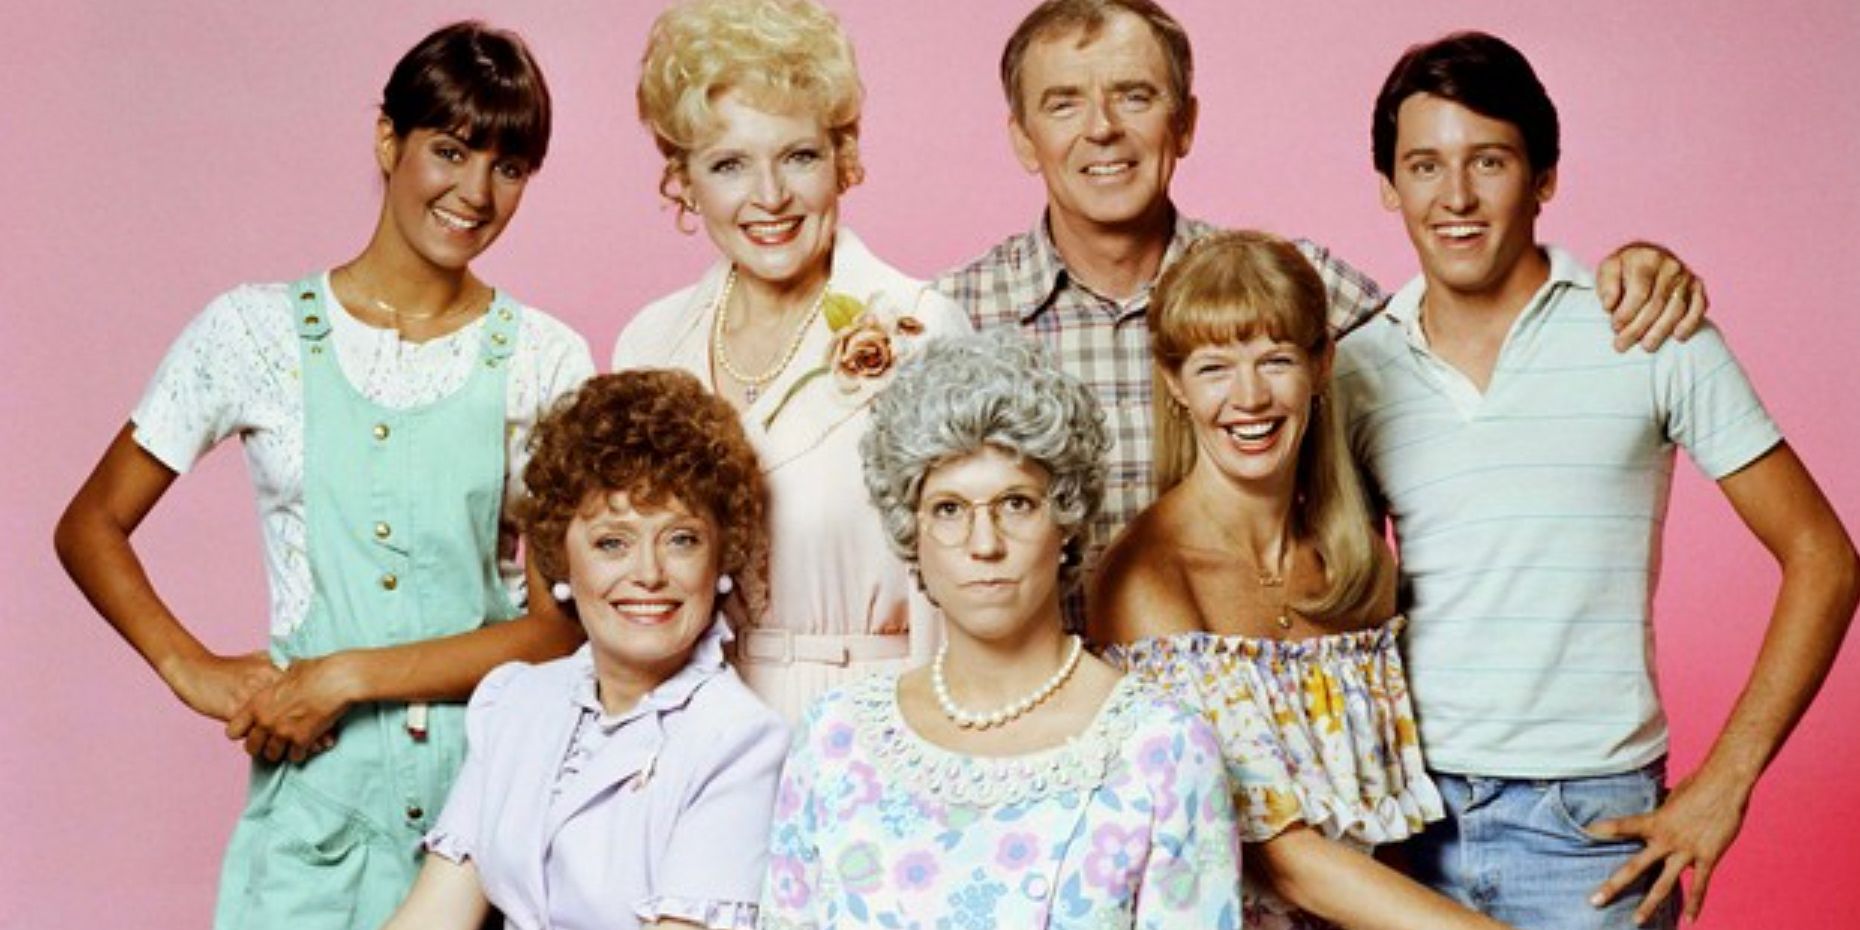 The original cast of Mamas Family poses together against a pink baground in a promotional family photo for the series